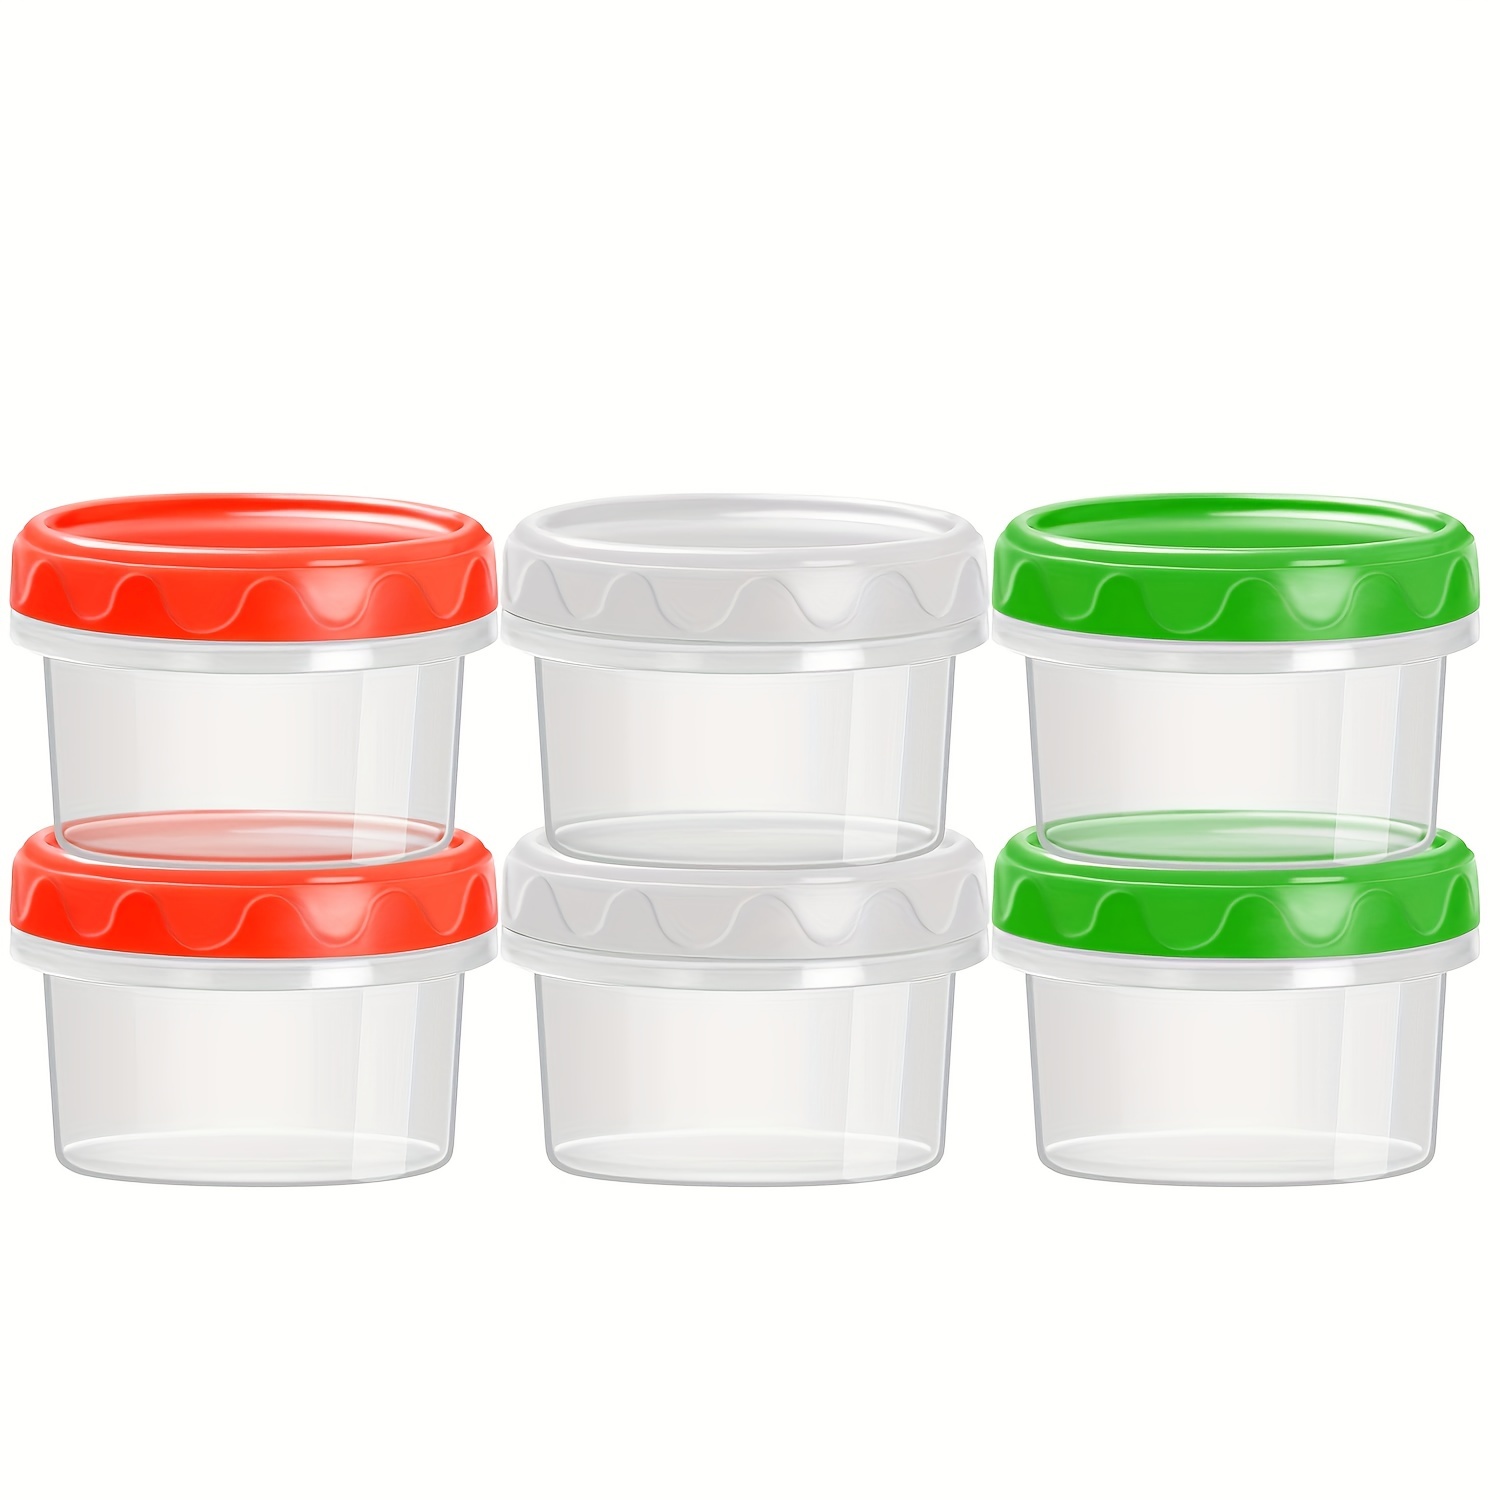 1.7 Oz/50Ml Salad Dressing Container to Go for Food, 6 Pack, Reusable for  Lunch